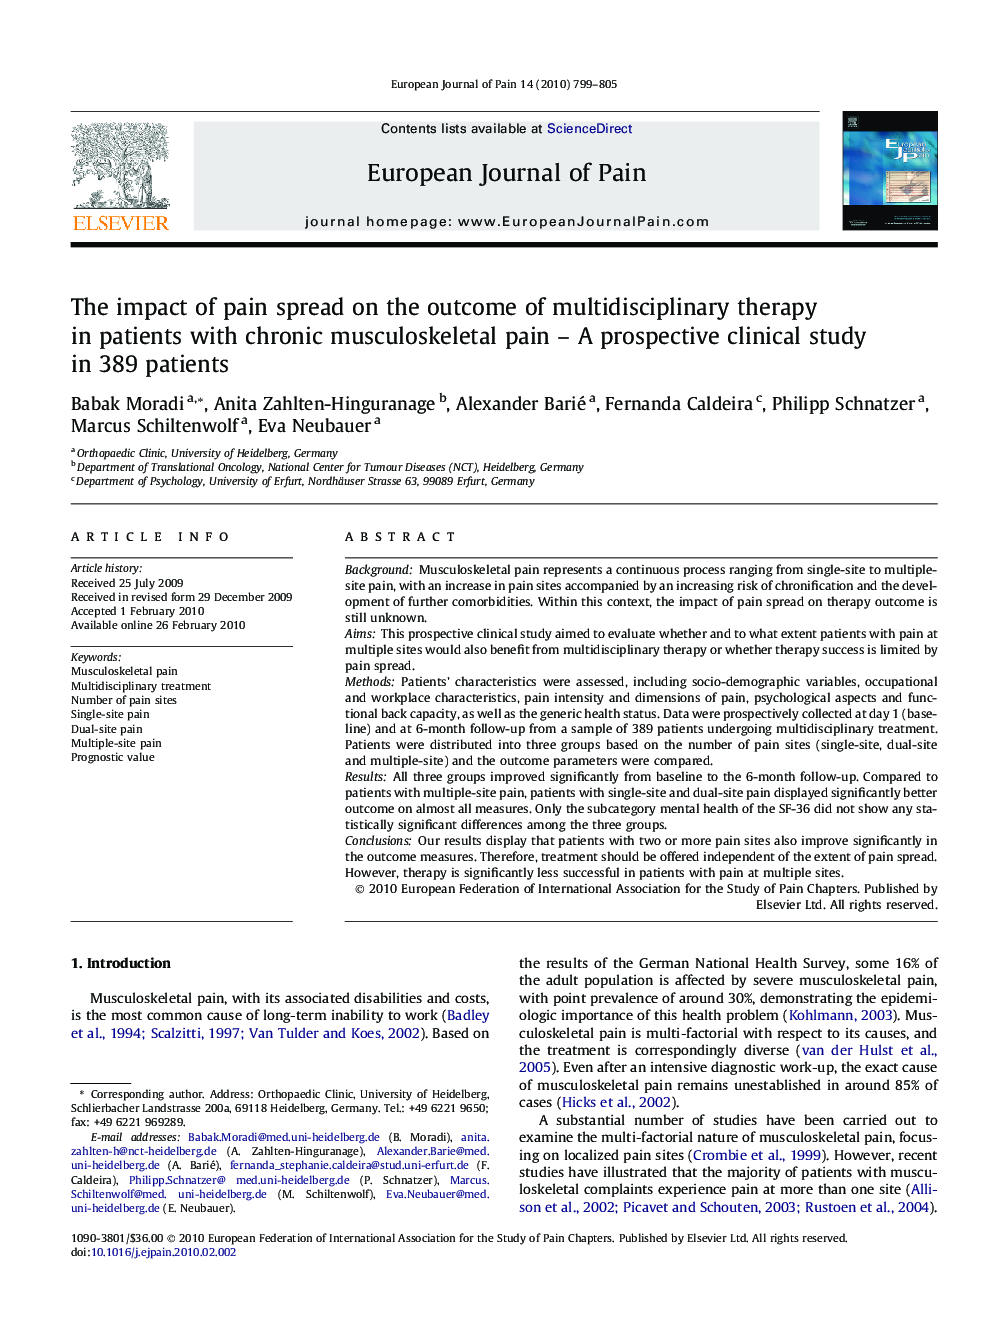 The impact of pain spread on the outcome of multidisciplinary therapy in patients with chronic musculoskeletal pain - A prospective clinical study in 389 patients